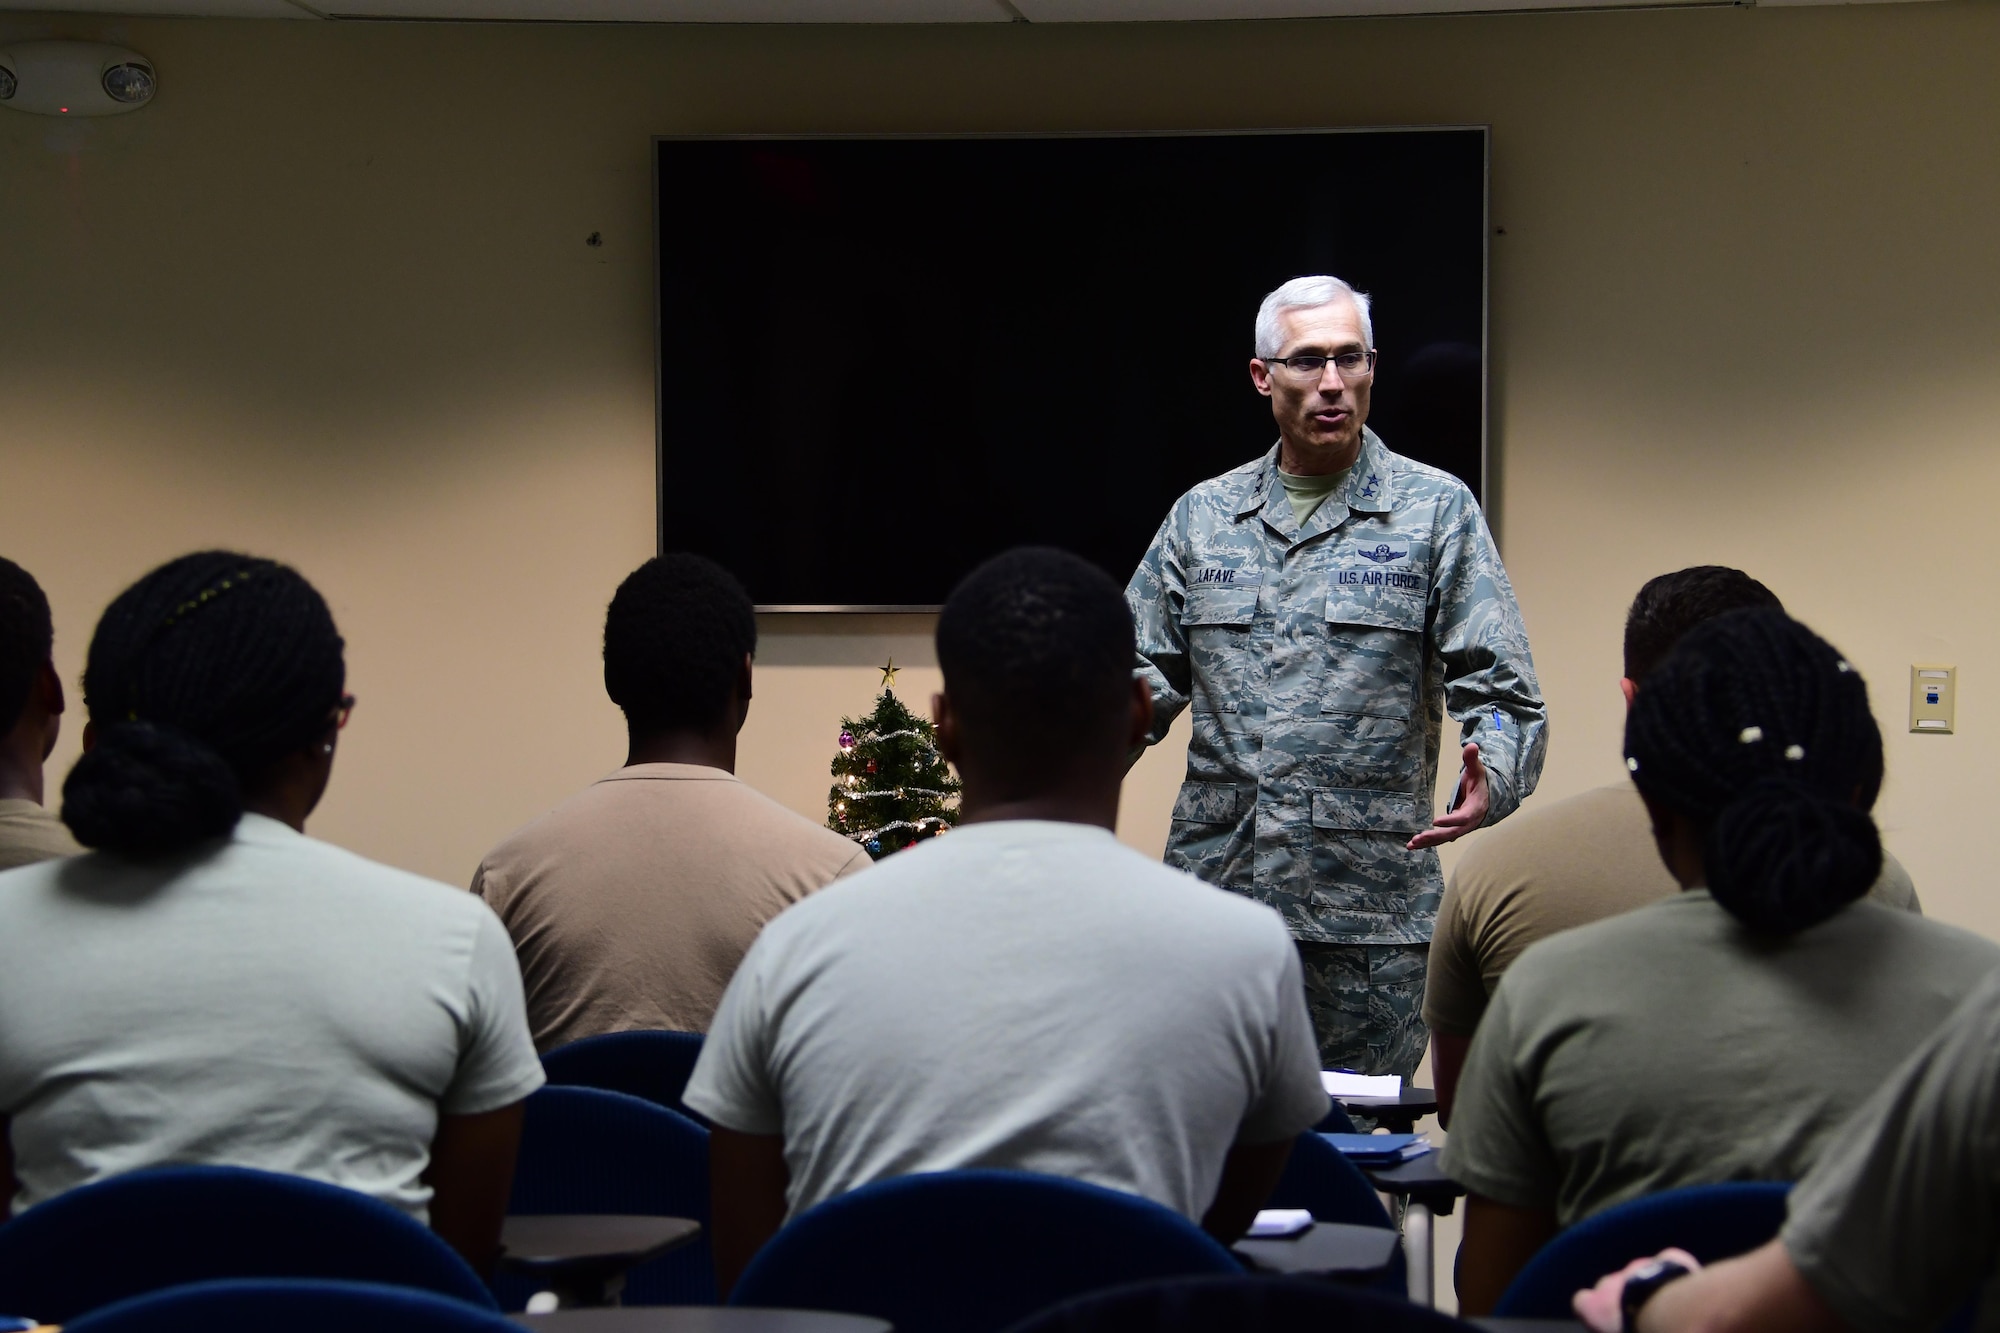 Maj. Gen. Craig La Fave, 22nd Air Force commander, speaks to a group of trainees in the Development and Training Flight at Dobbins Air Reserve Base, Georgia Dec. 2, 2017. He left parting words for the trainees in which he stressed the importance of having a good support network of family and friends during military service. (U.S. Air Force photo by Staff Sgt. Miles Wilson)